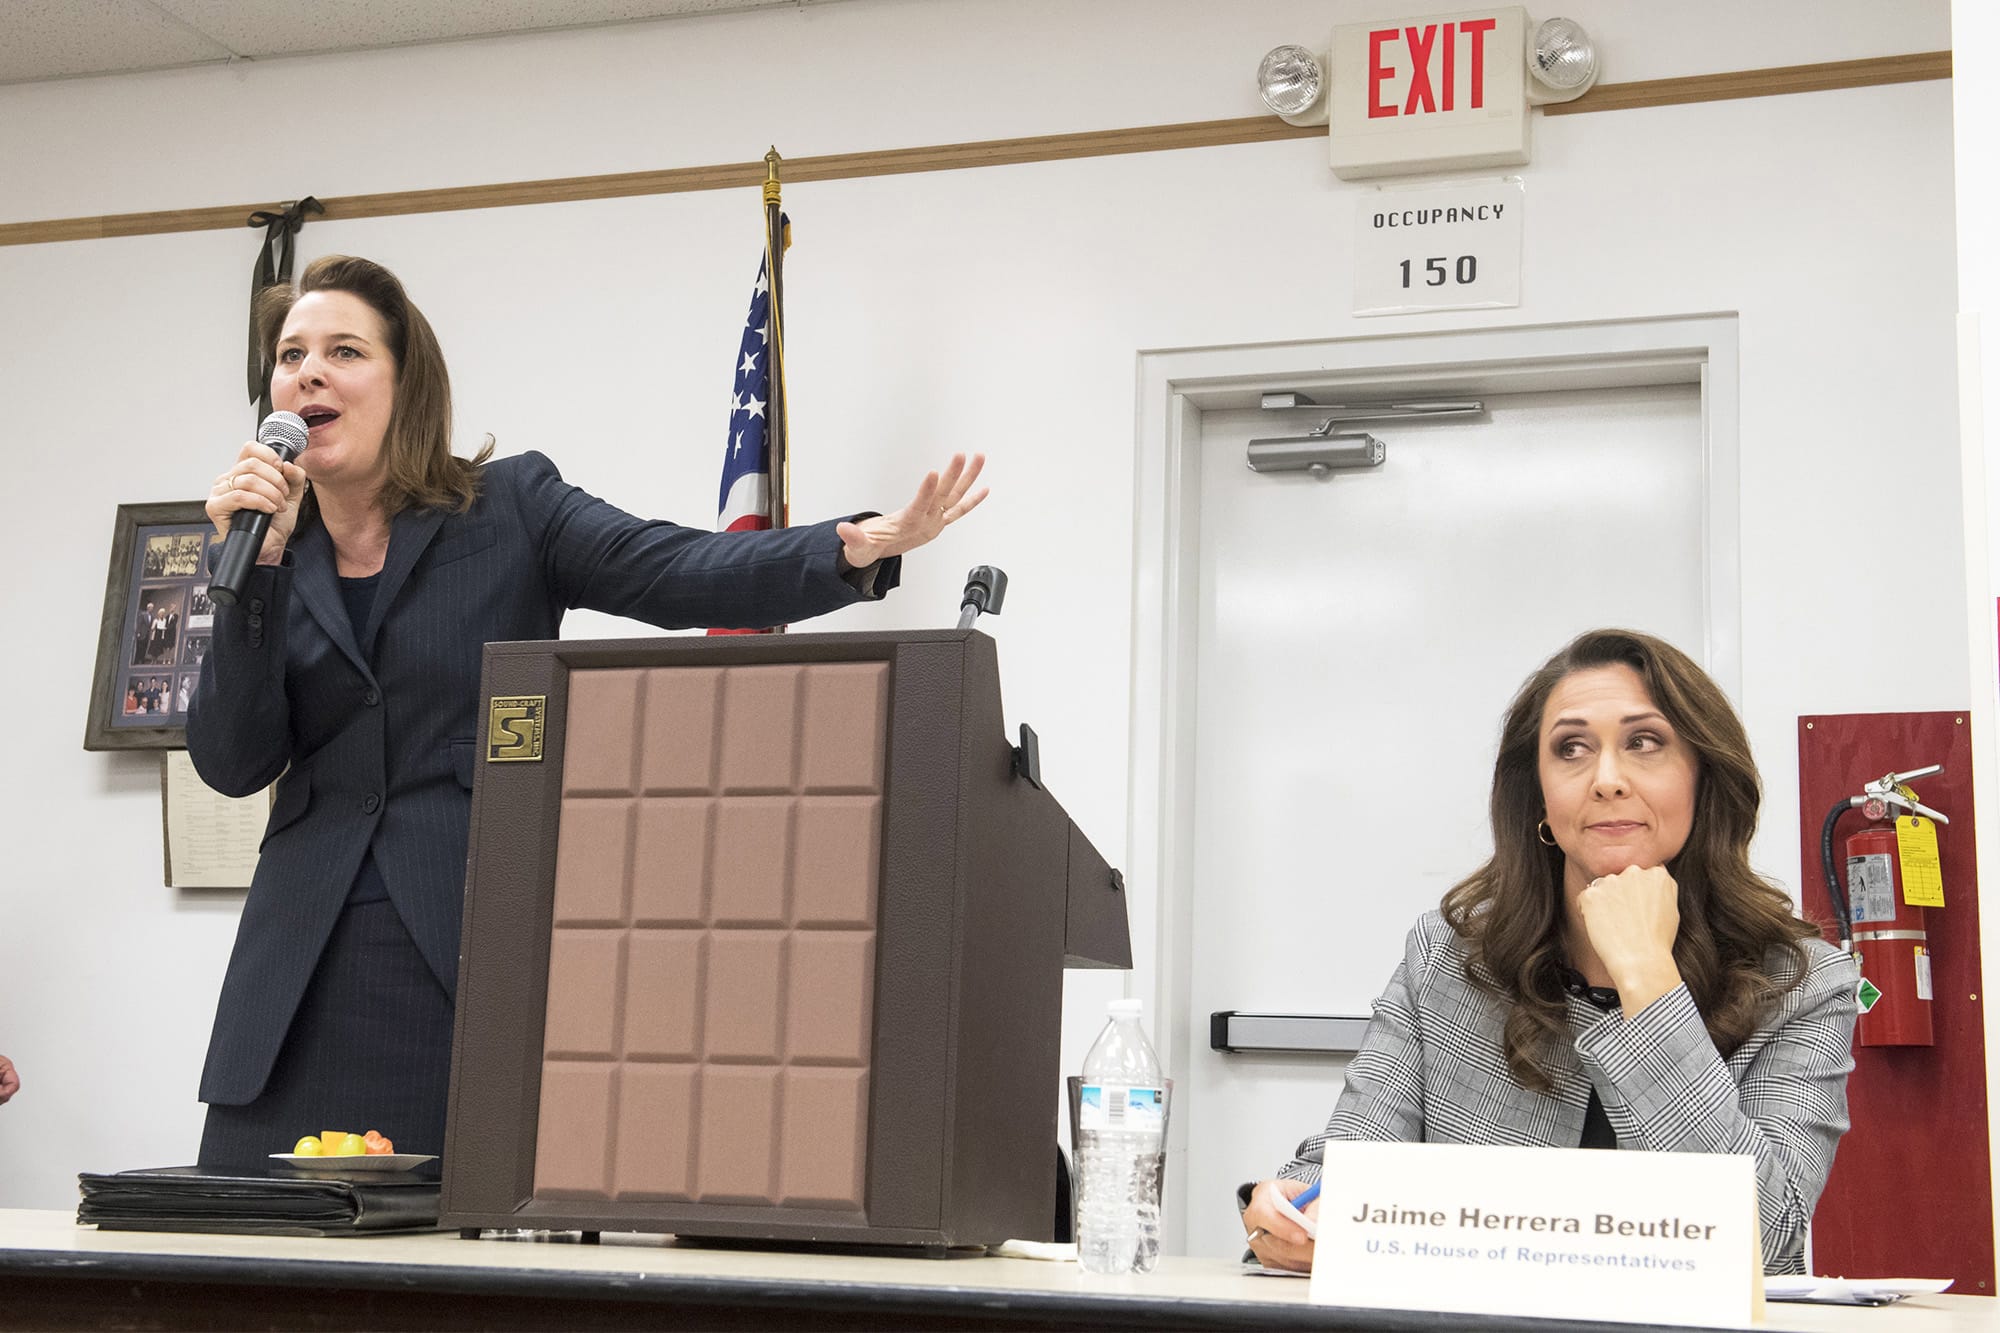 Carolyn Long, Democratic candidate for the 3rd Congressional District, left, gives her closing statement while and Incumbent U.S. Rep. Jaime Herrera Beutler, R-Battle Ground reacts during a forum at the Goldendale Grange Hall Wednesday night.